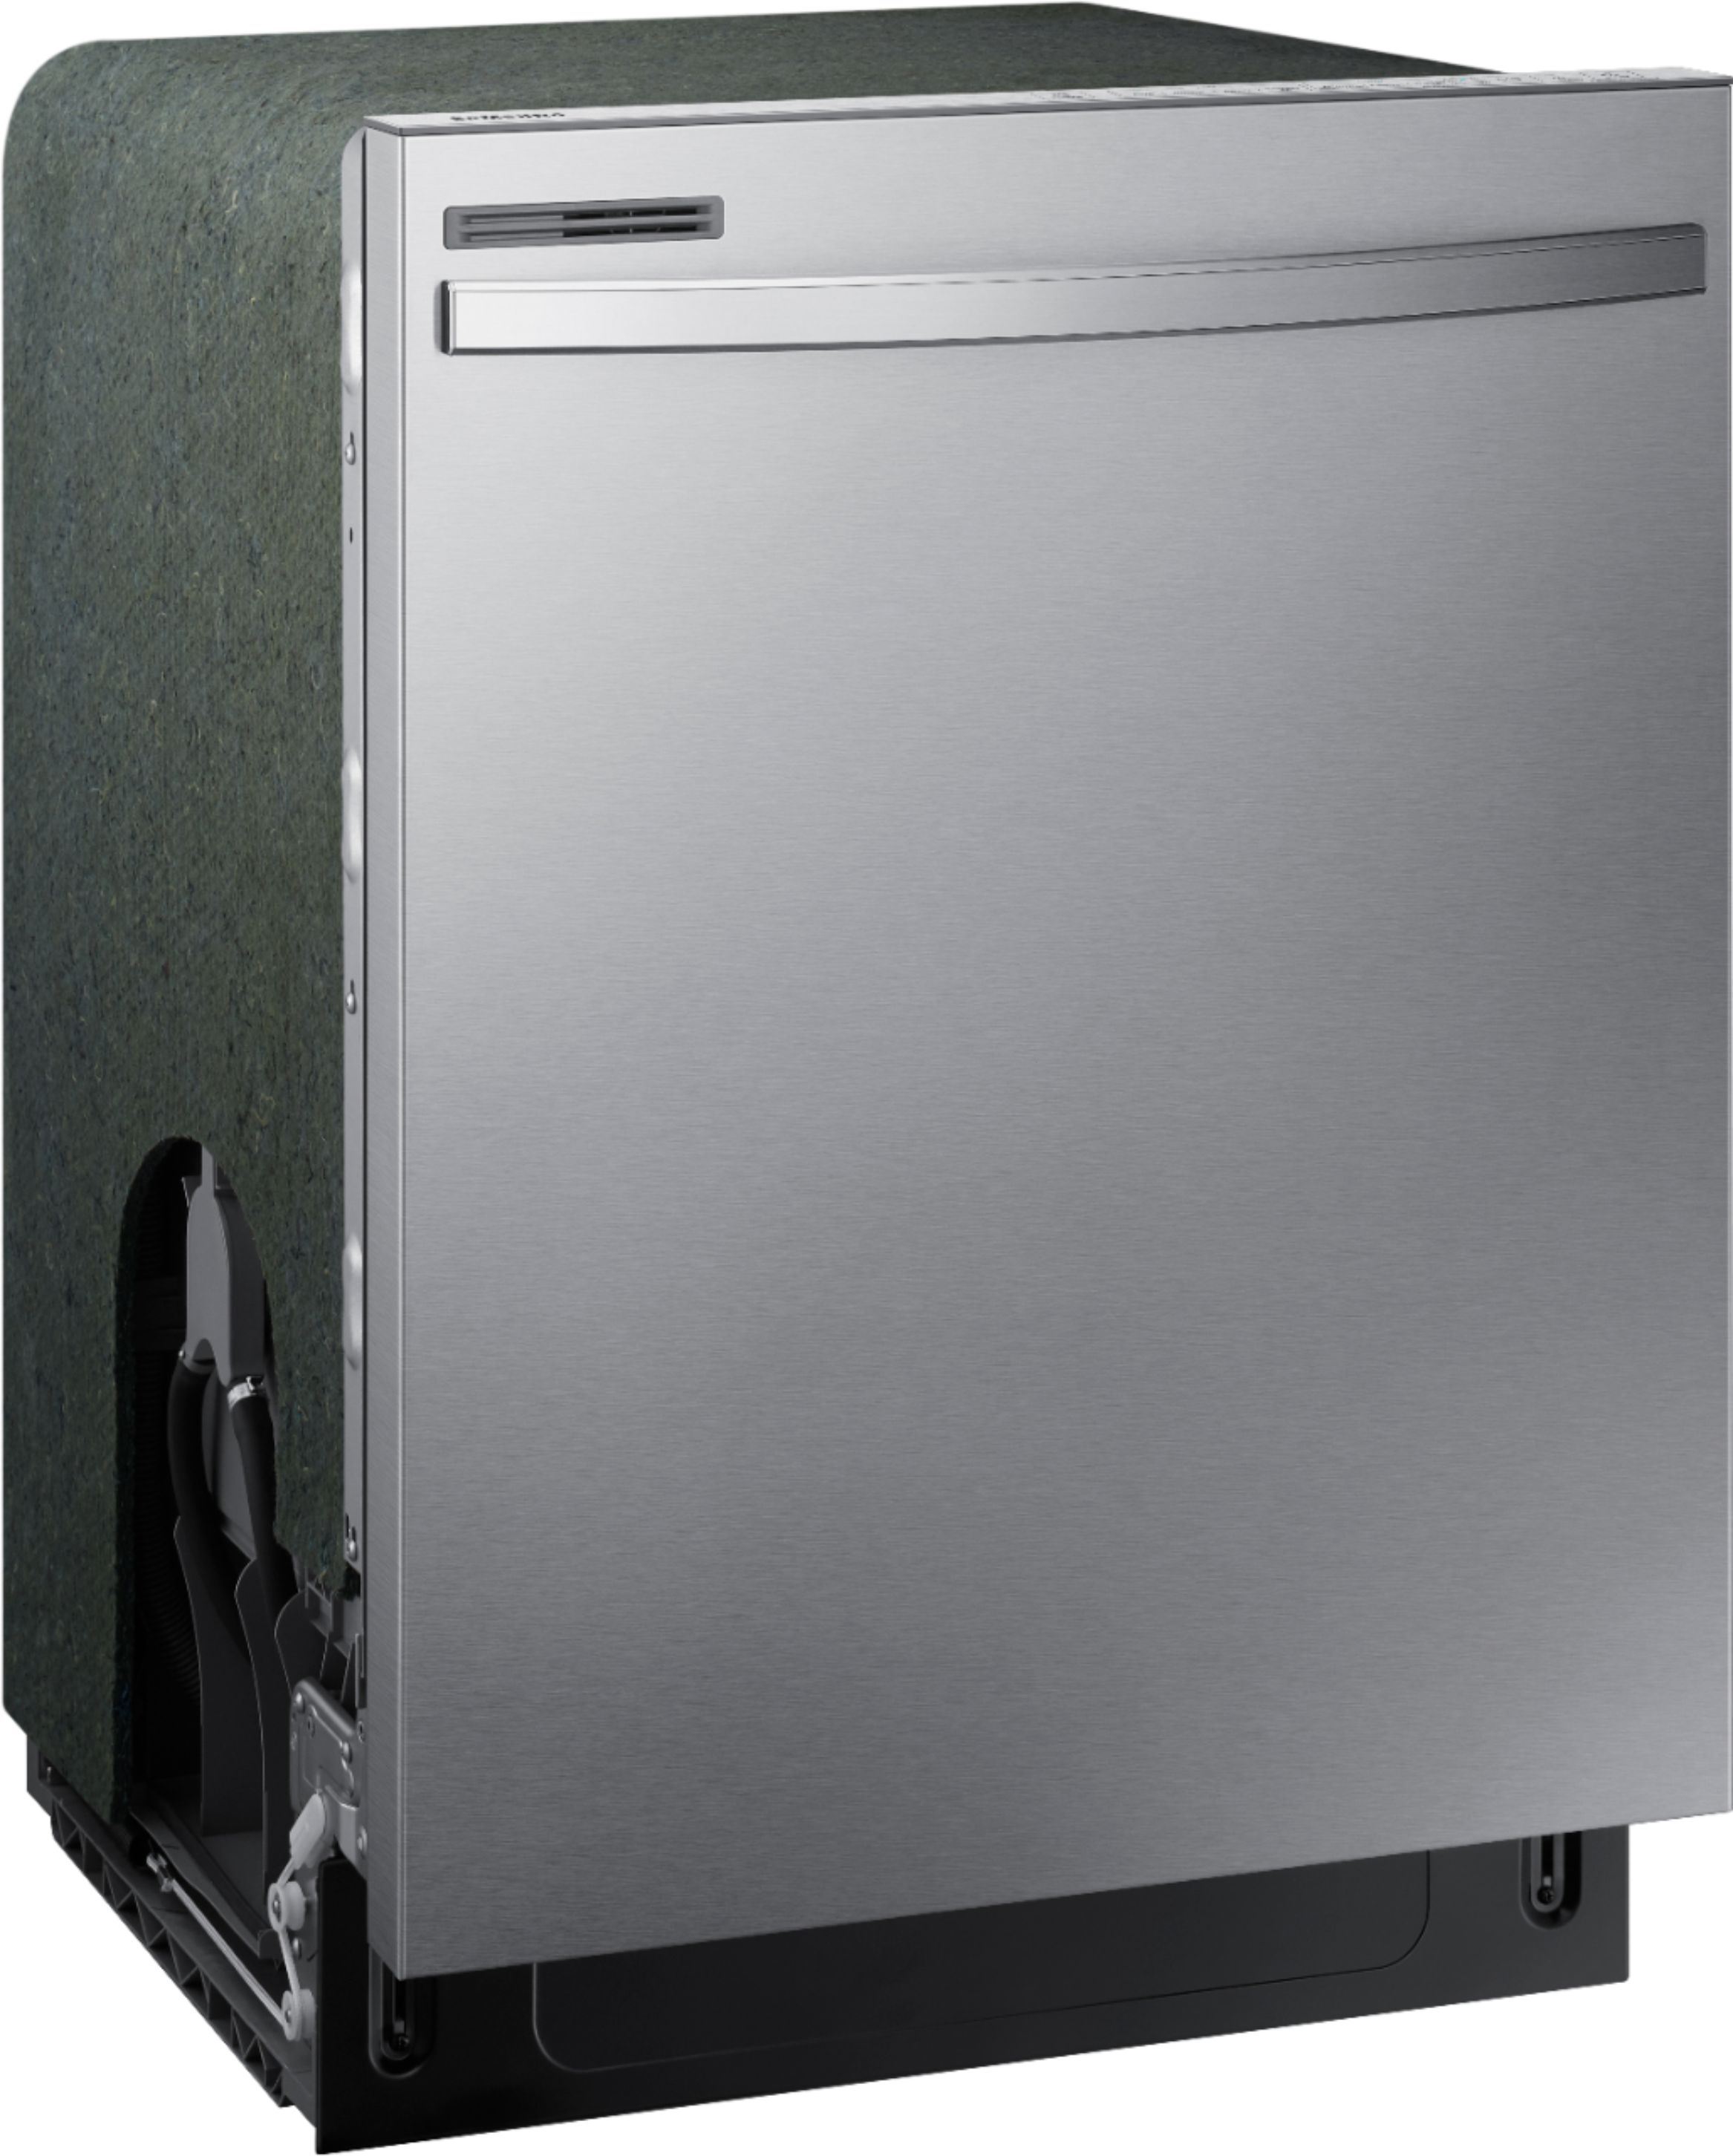 Angle View: Fulgor Milano - 24" Top Control Tall Tub Built-In Dishwasher with Stainless Steel Tub - Black